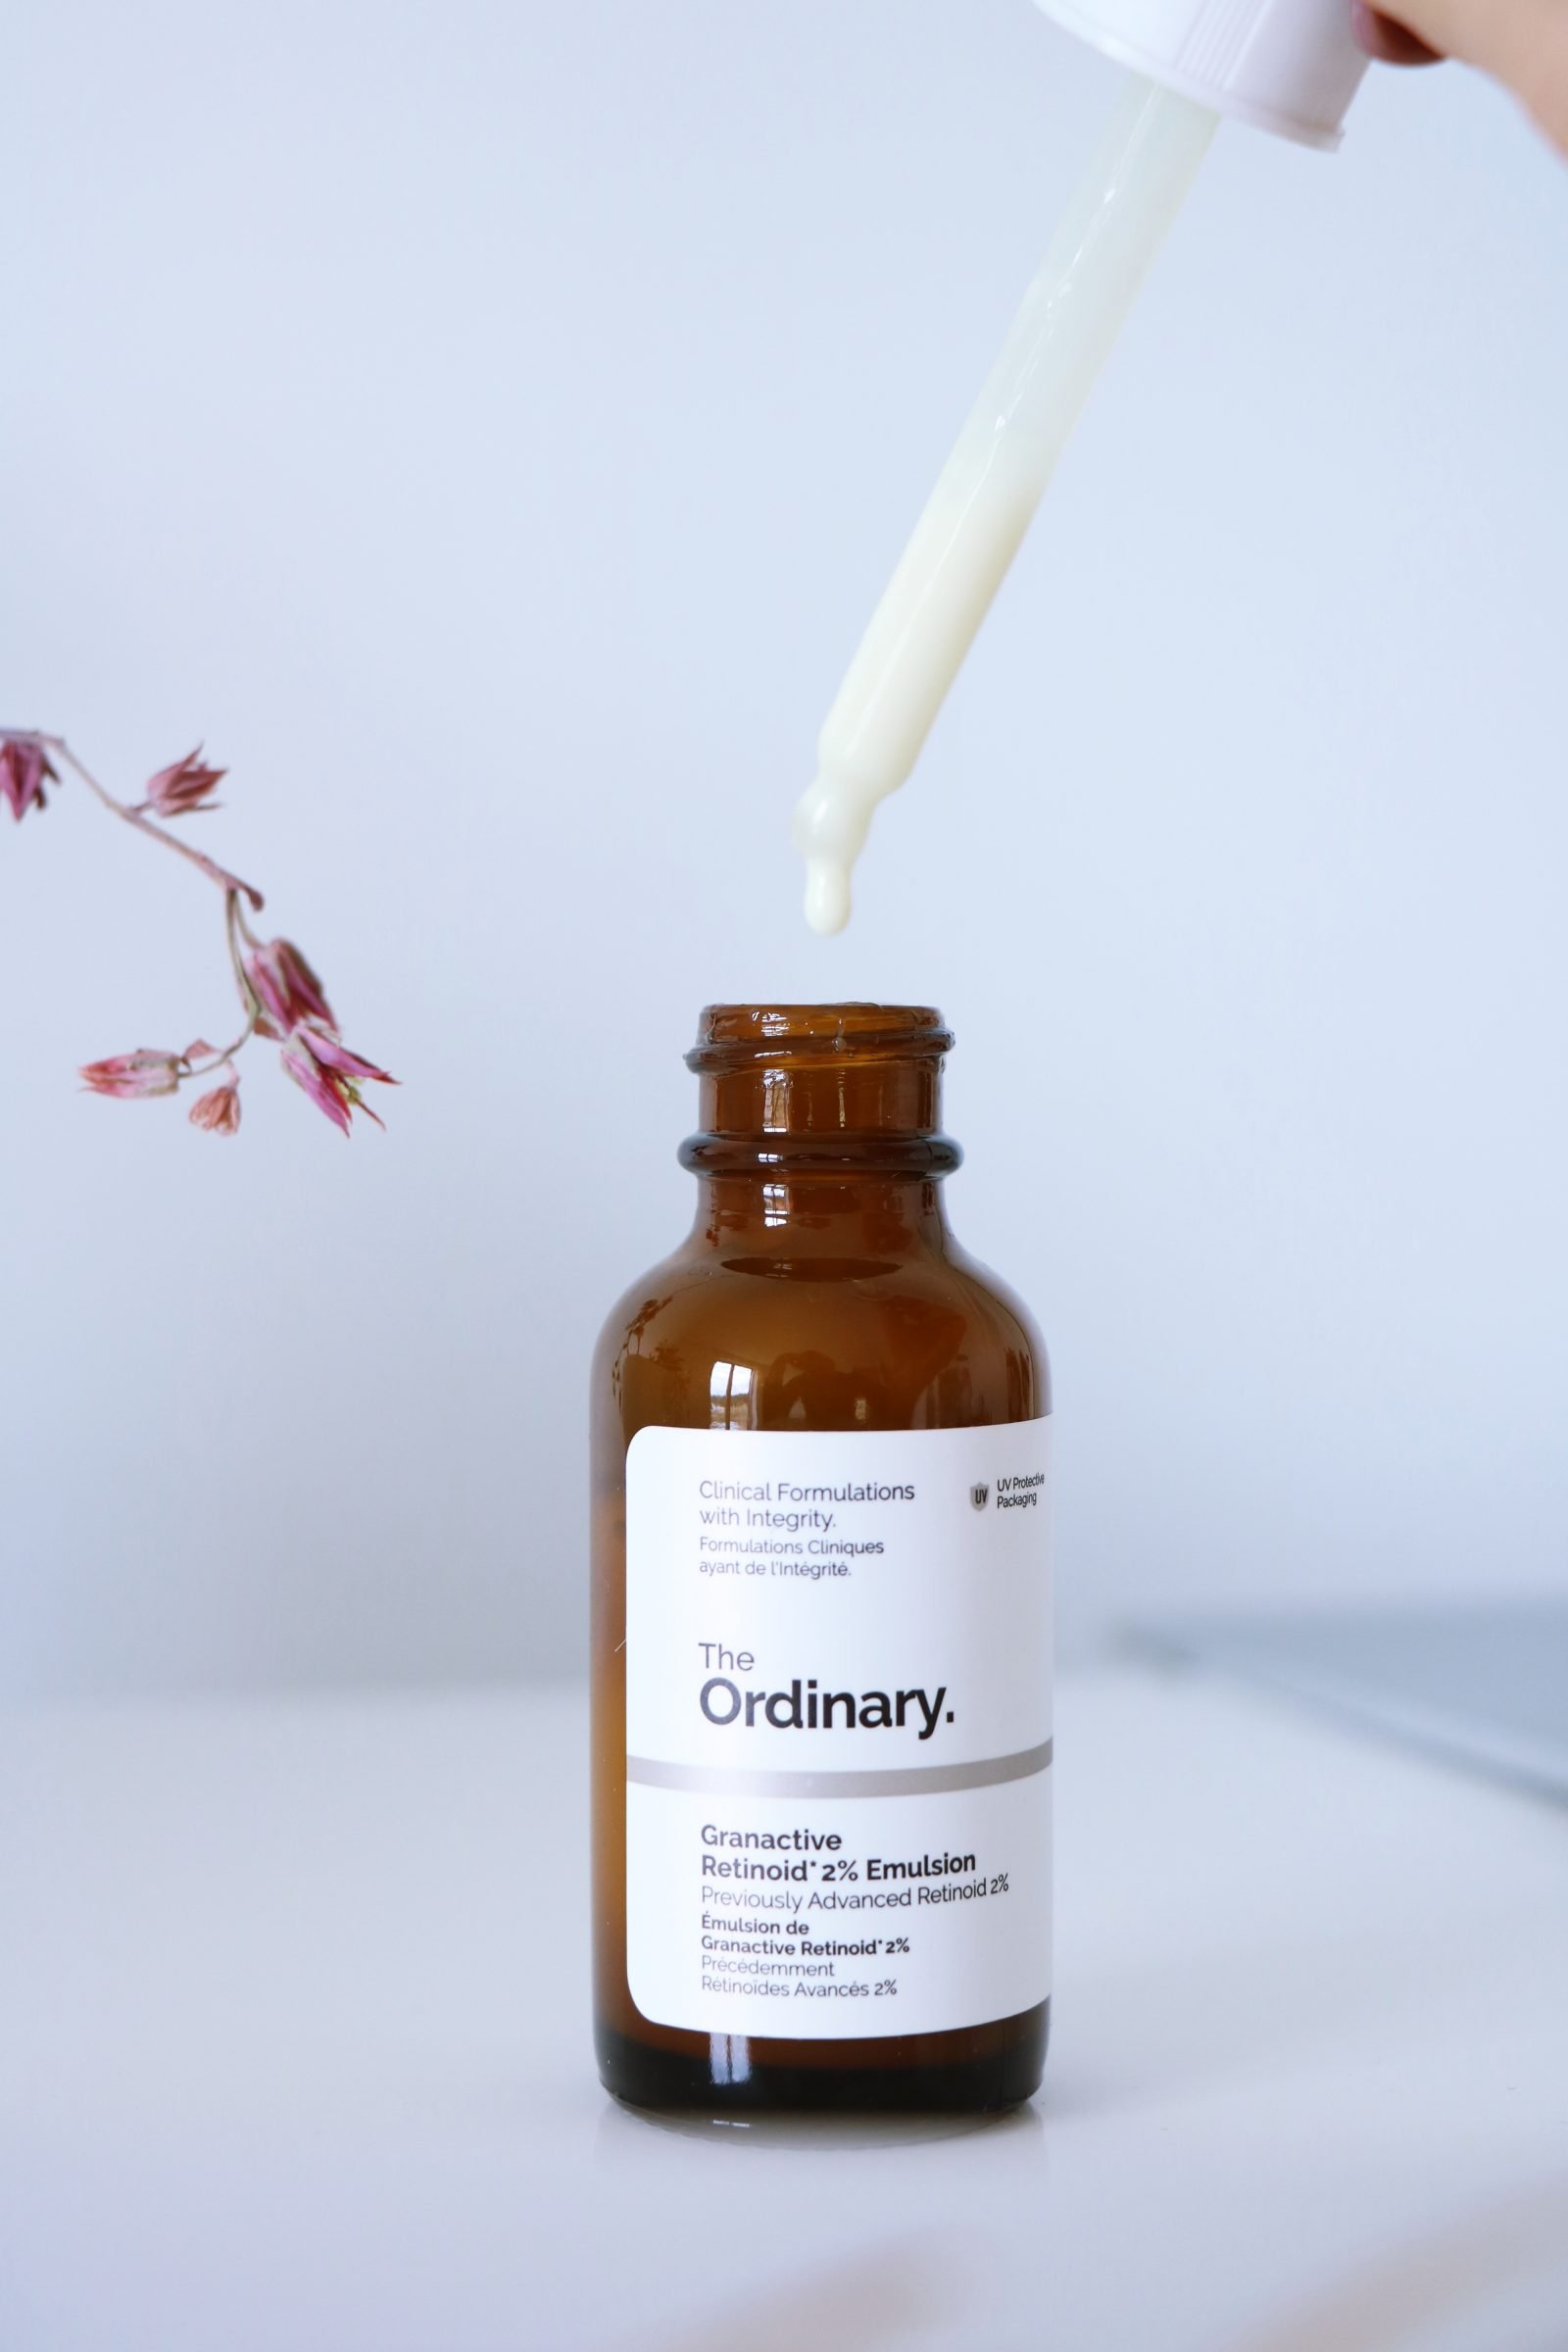 THE ORDINARY NO-BRAINER SET REVIEW